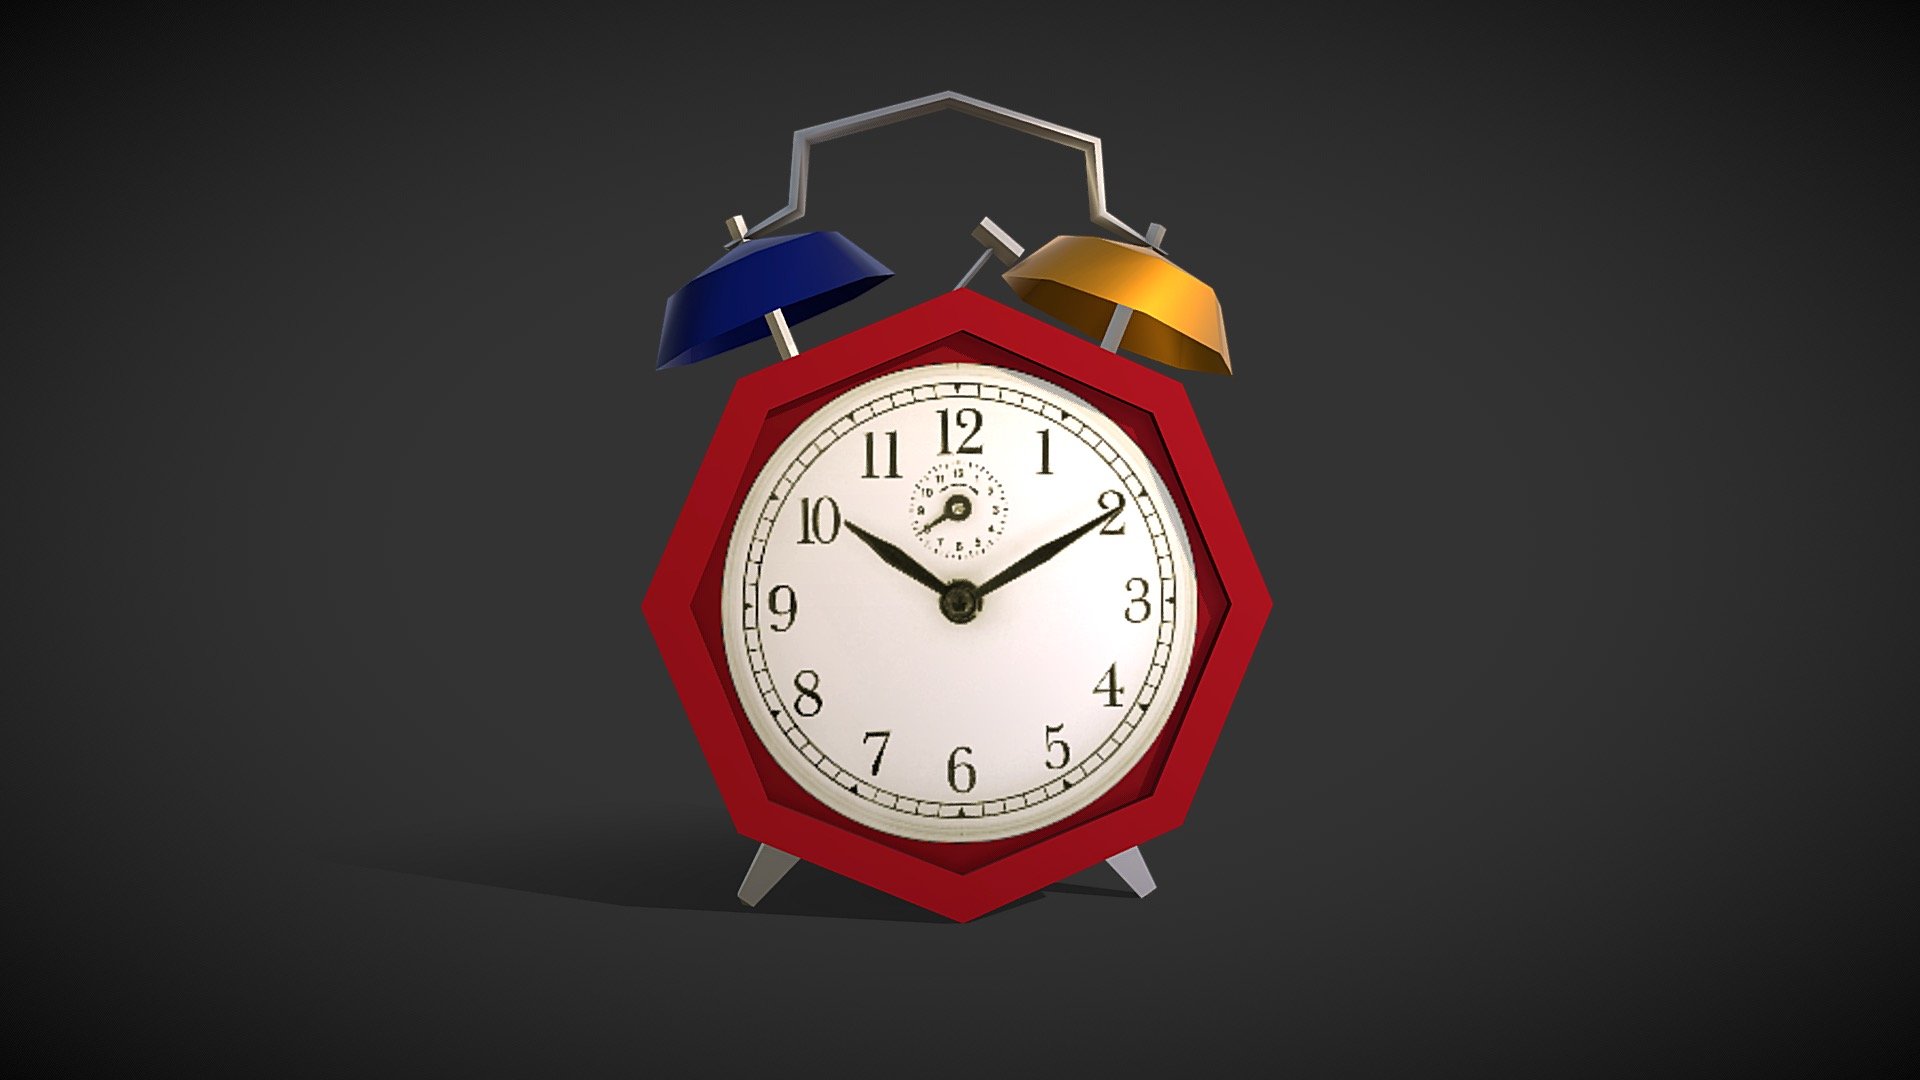 I made this low-poly model for the Household Props Challenge: https://tinyurl.com/ybk7c674

If you download this model, I’m honored! Leave a comment below and let me know how you’re using it; I’d love to hear.

Clock face from Wikimedia Commons: https://tinyurl.com/y6umbq4w

Modeled in Cinema 4D - Alarm Clock: Household Props 10 - Download Free 3D model by Daniel O'Neil (@doneil) 3d model